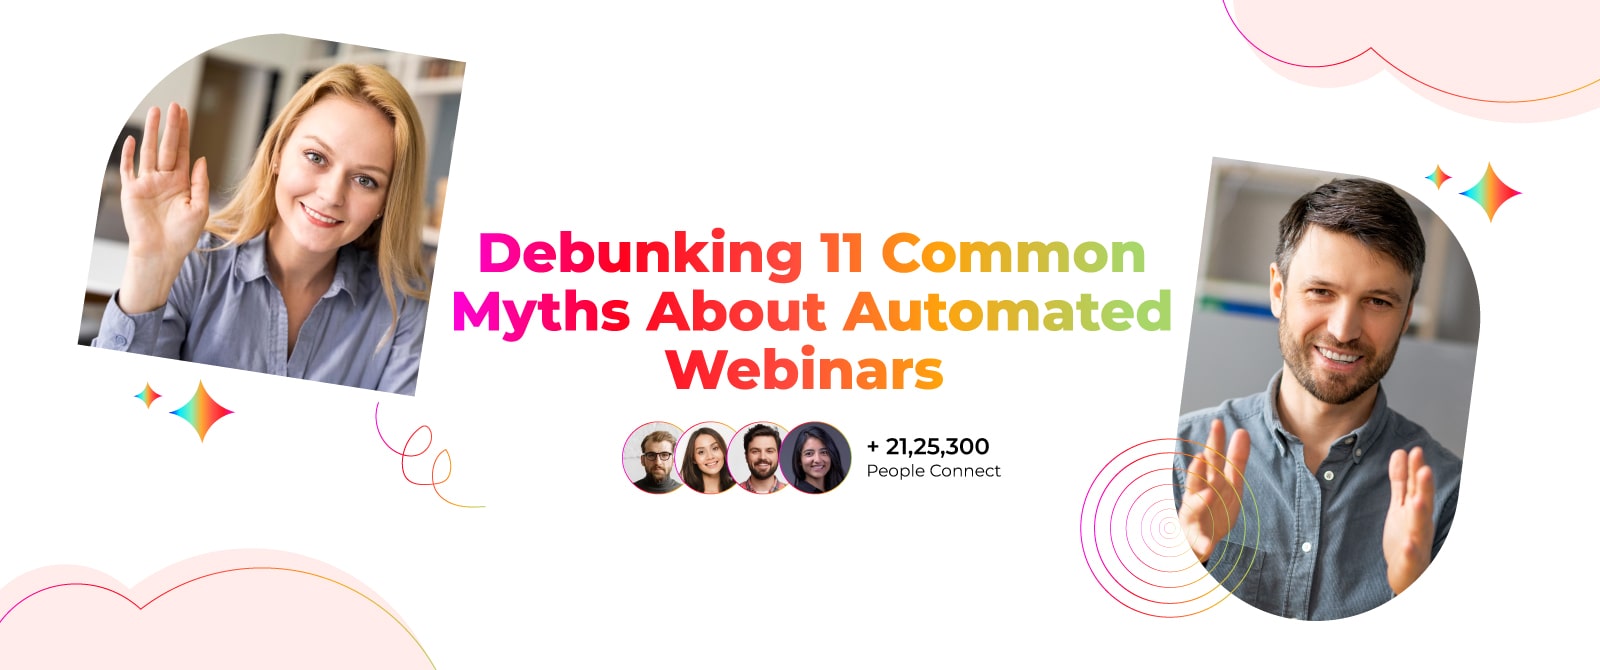 Debunking 11 Common Myths About Automated Webinars